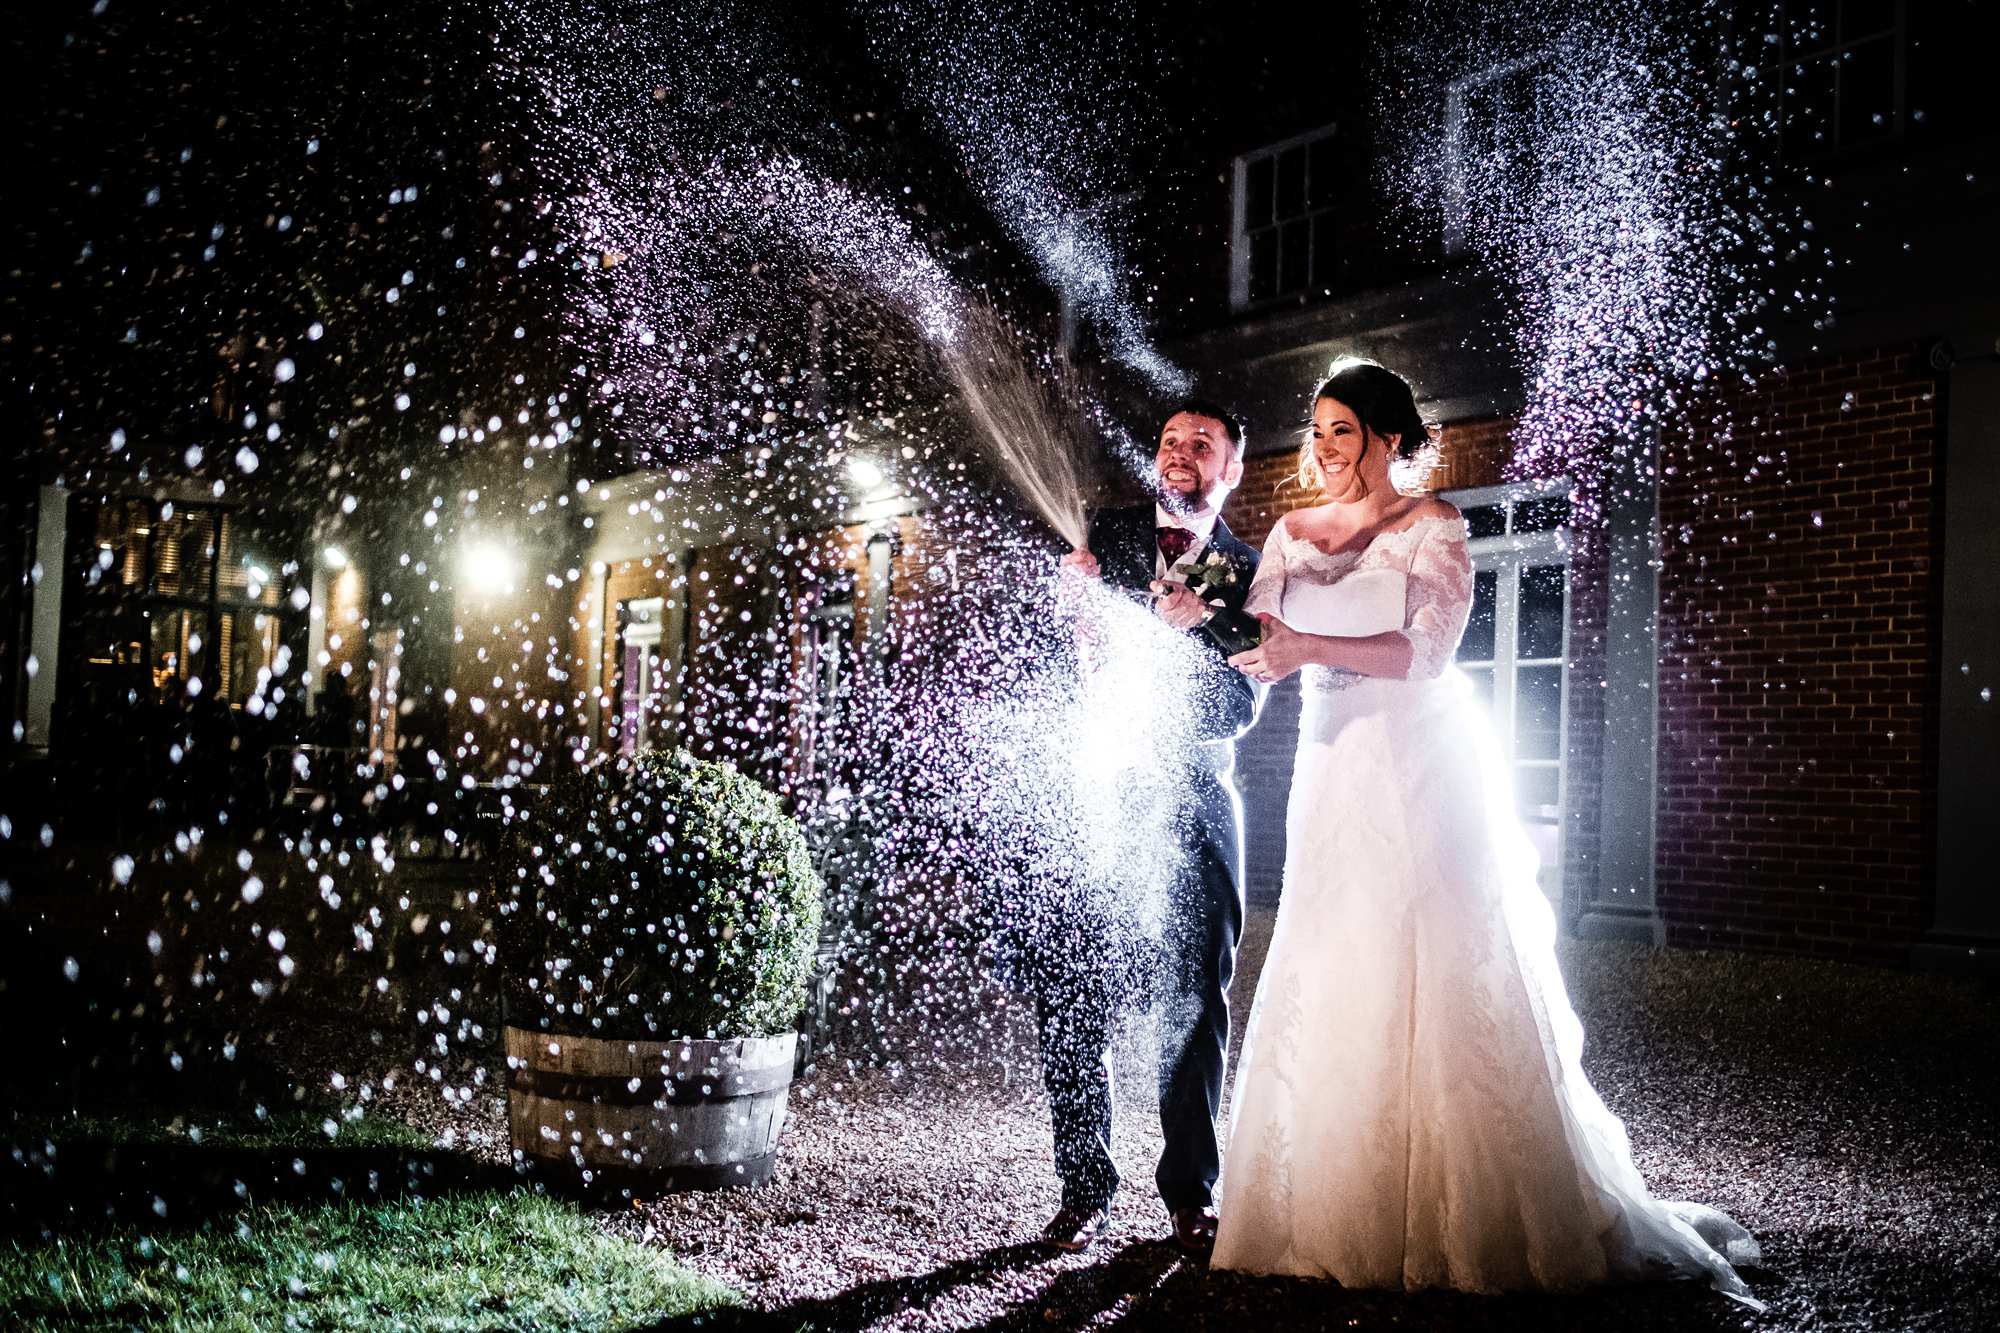 February wedding at Highfield Park in Hampshire